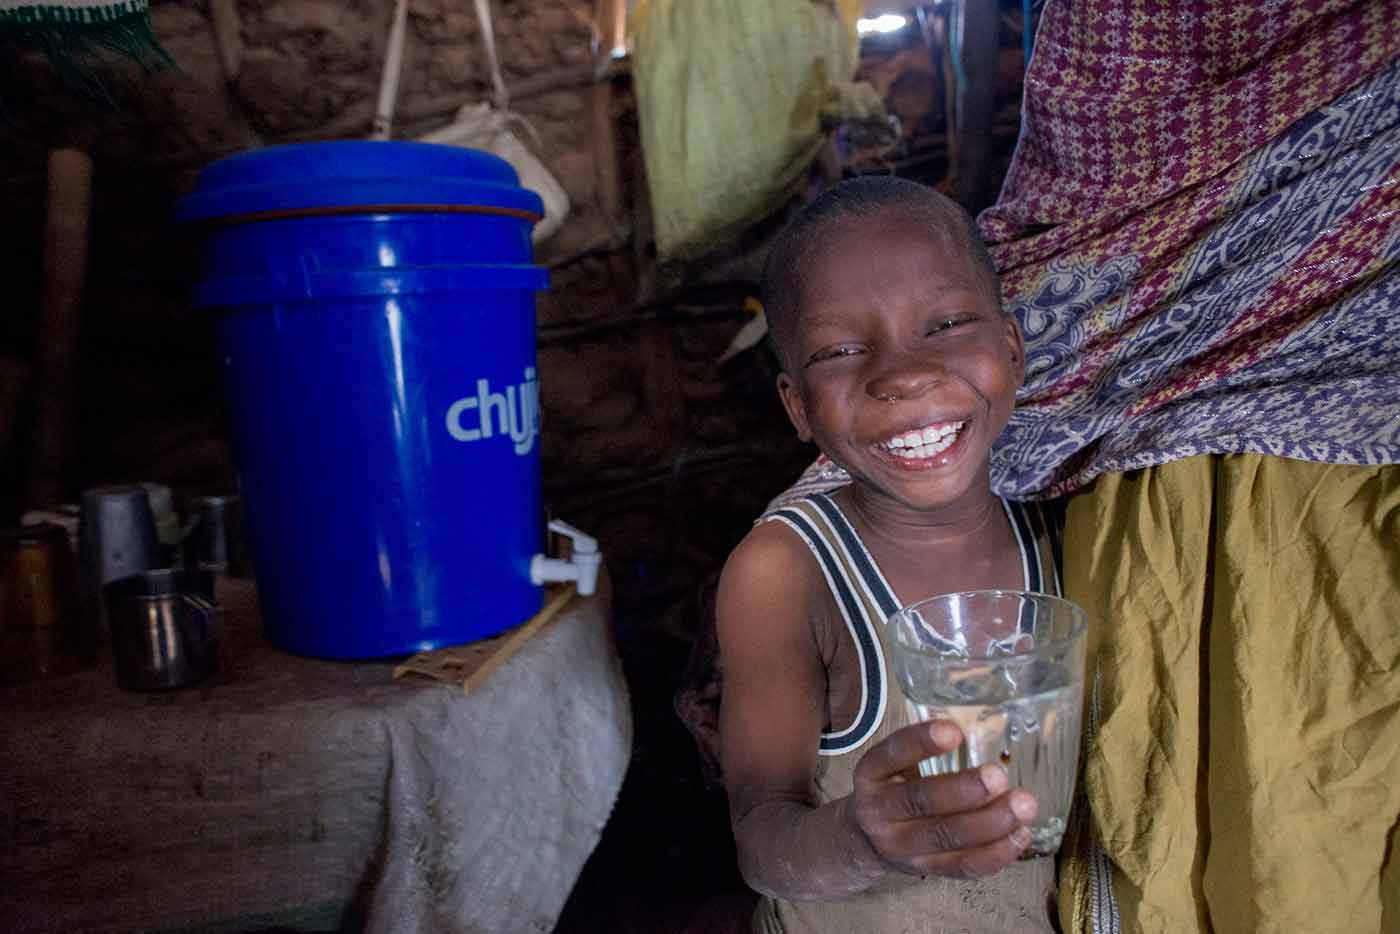 a boy smiles holding a water glass